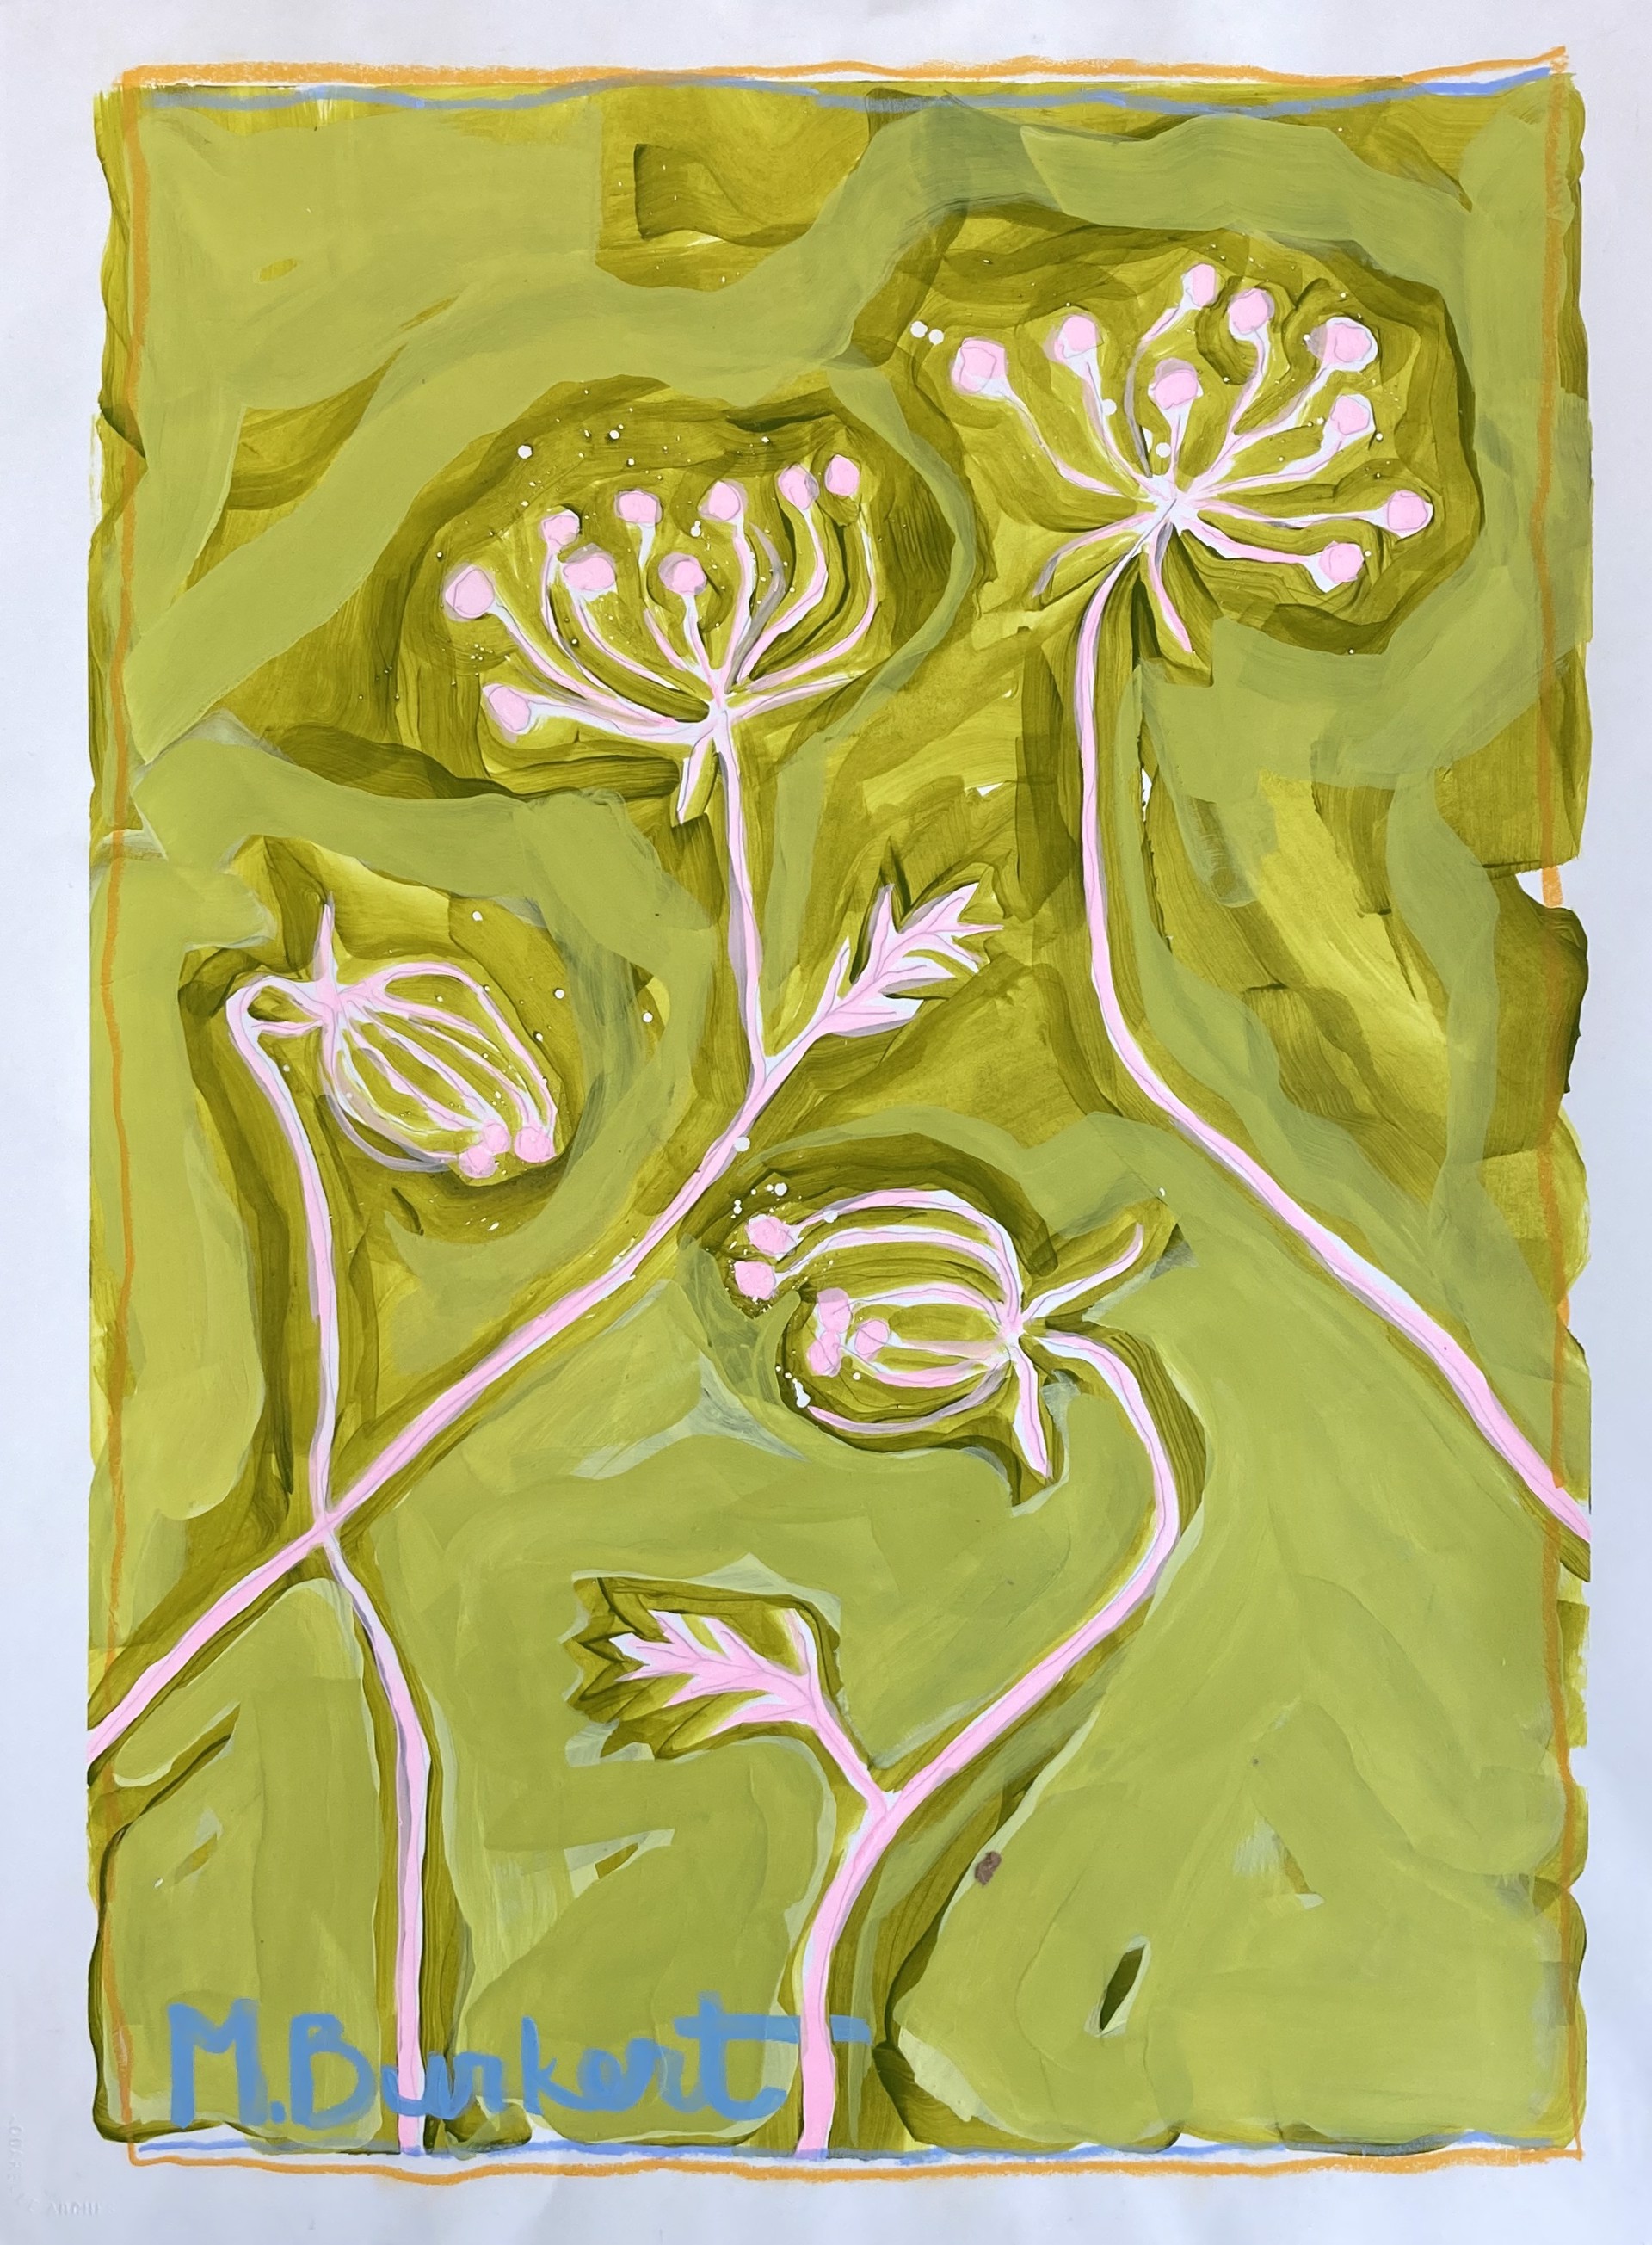 Gold/Pink Queen Anne's Lace  by Martha Burkert